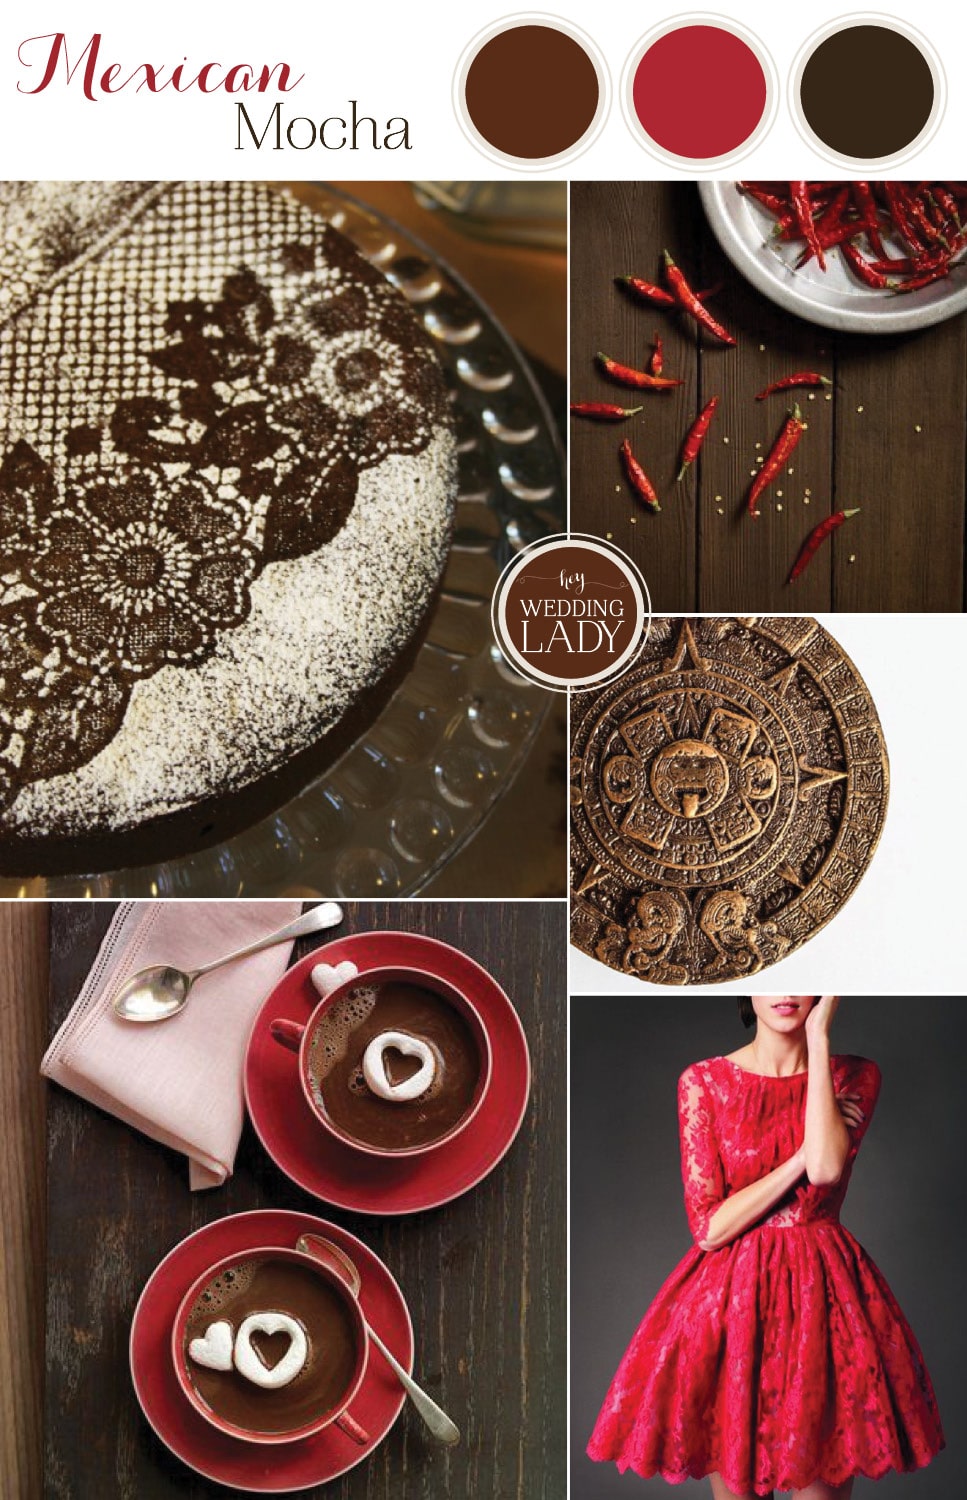 Mexican Mocha Wedding Inspiration in Rich Shades of Chocolate and Chili Red